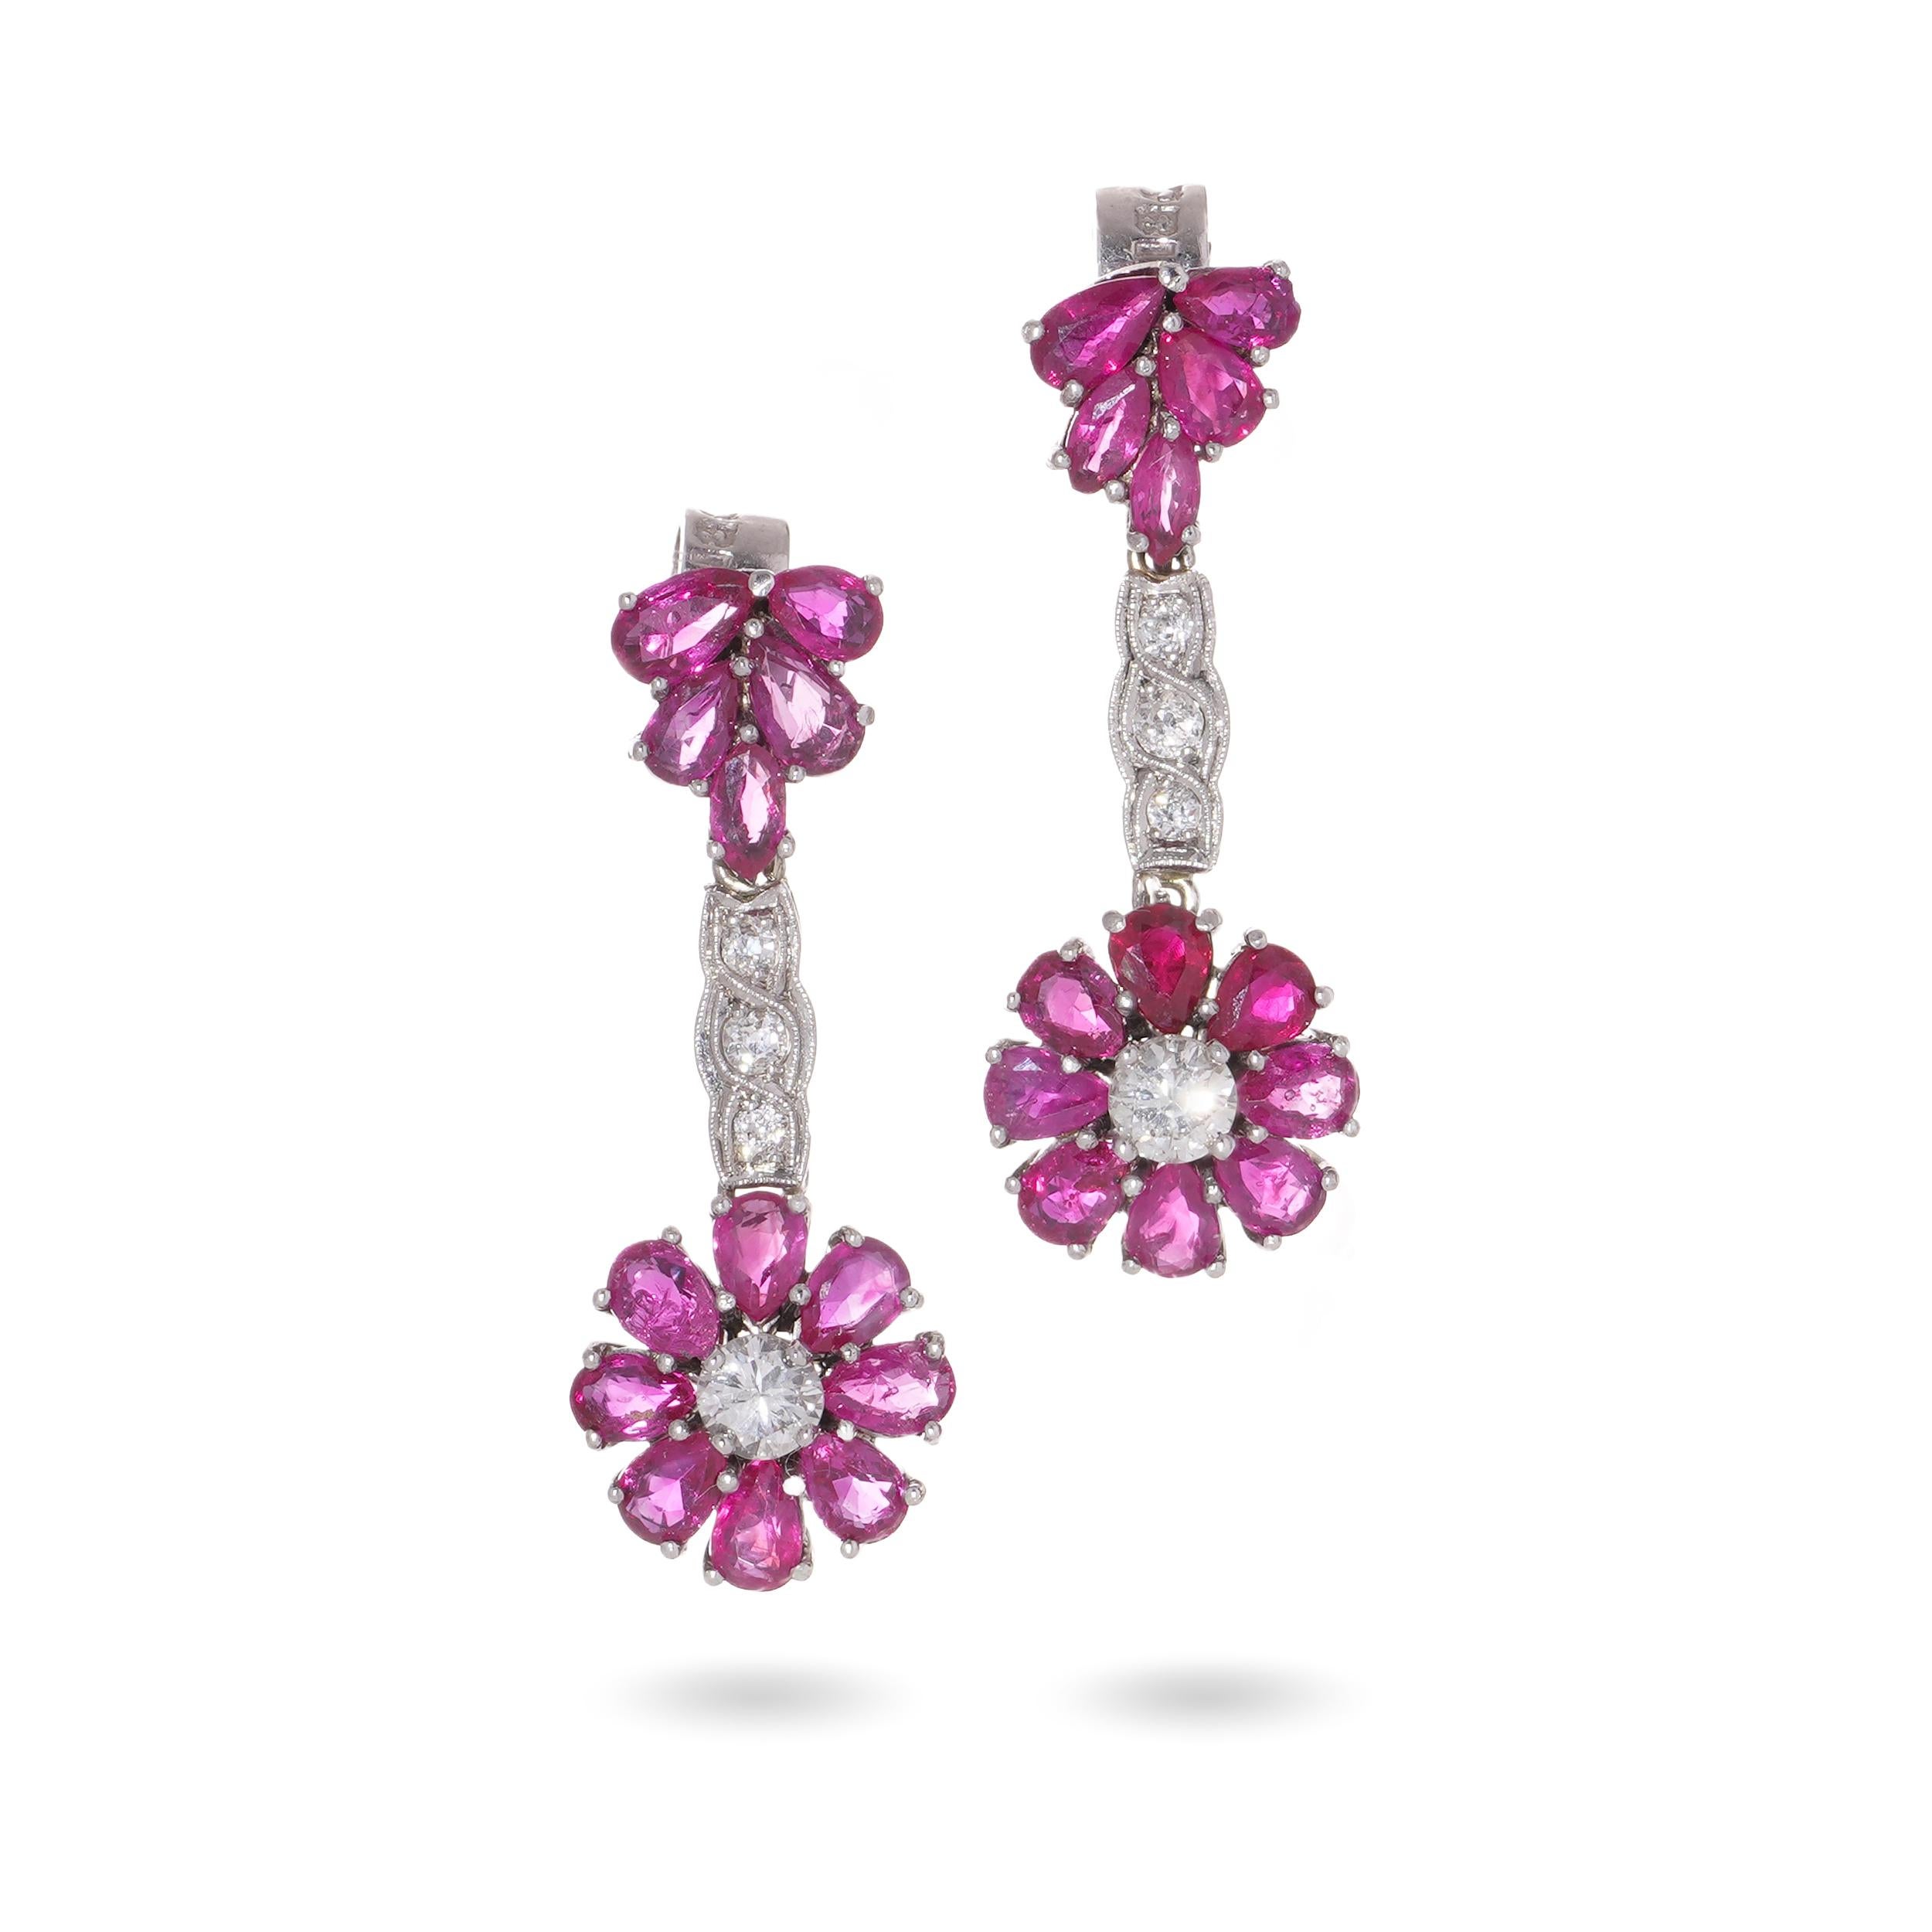 Vintage 18kt. white gold pair of drop earrings set with 0.54 carats of round brilliant diamonds and 2.60 carats of pear - cut rubies.
Hallmarked for 18kt. gold.

Item specifics:
Dimensions:
Length: 3 cm
Width: 1 cm
Weight: 8.00 grams in